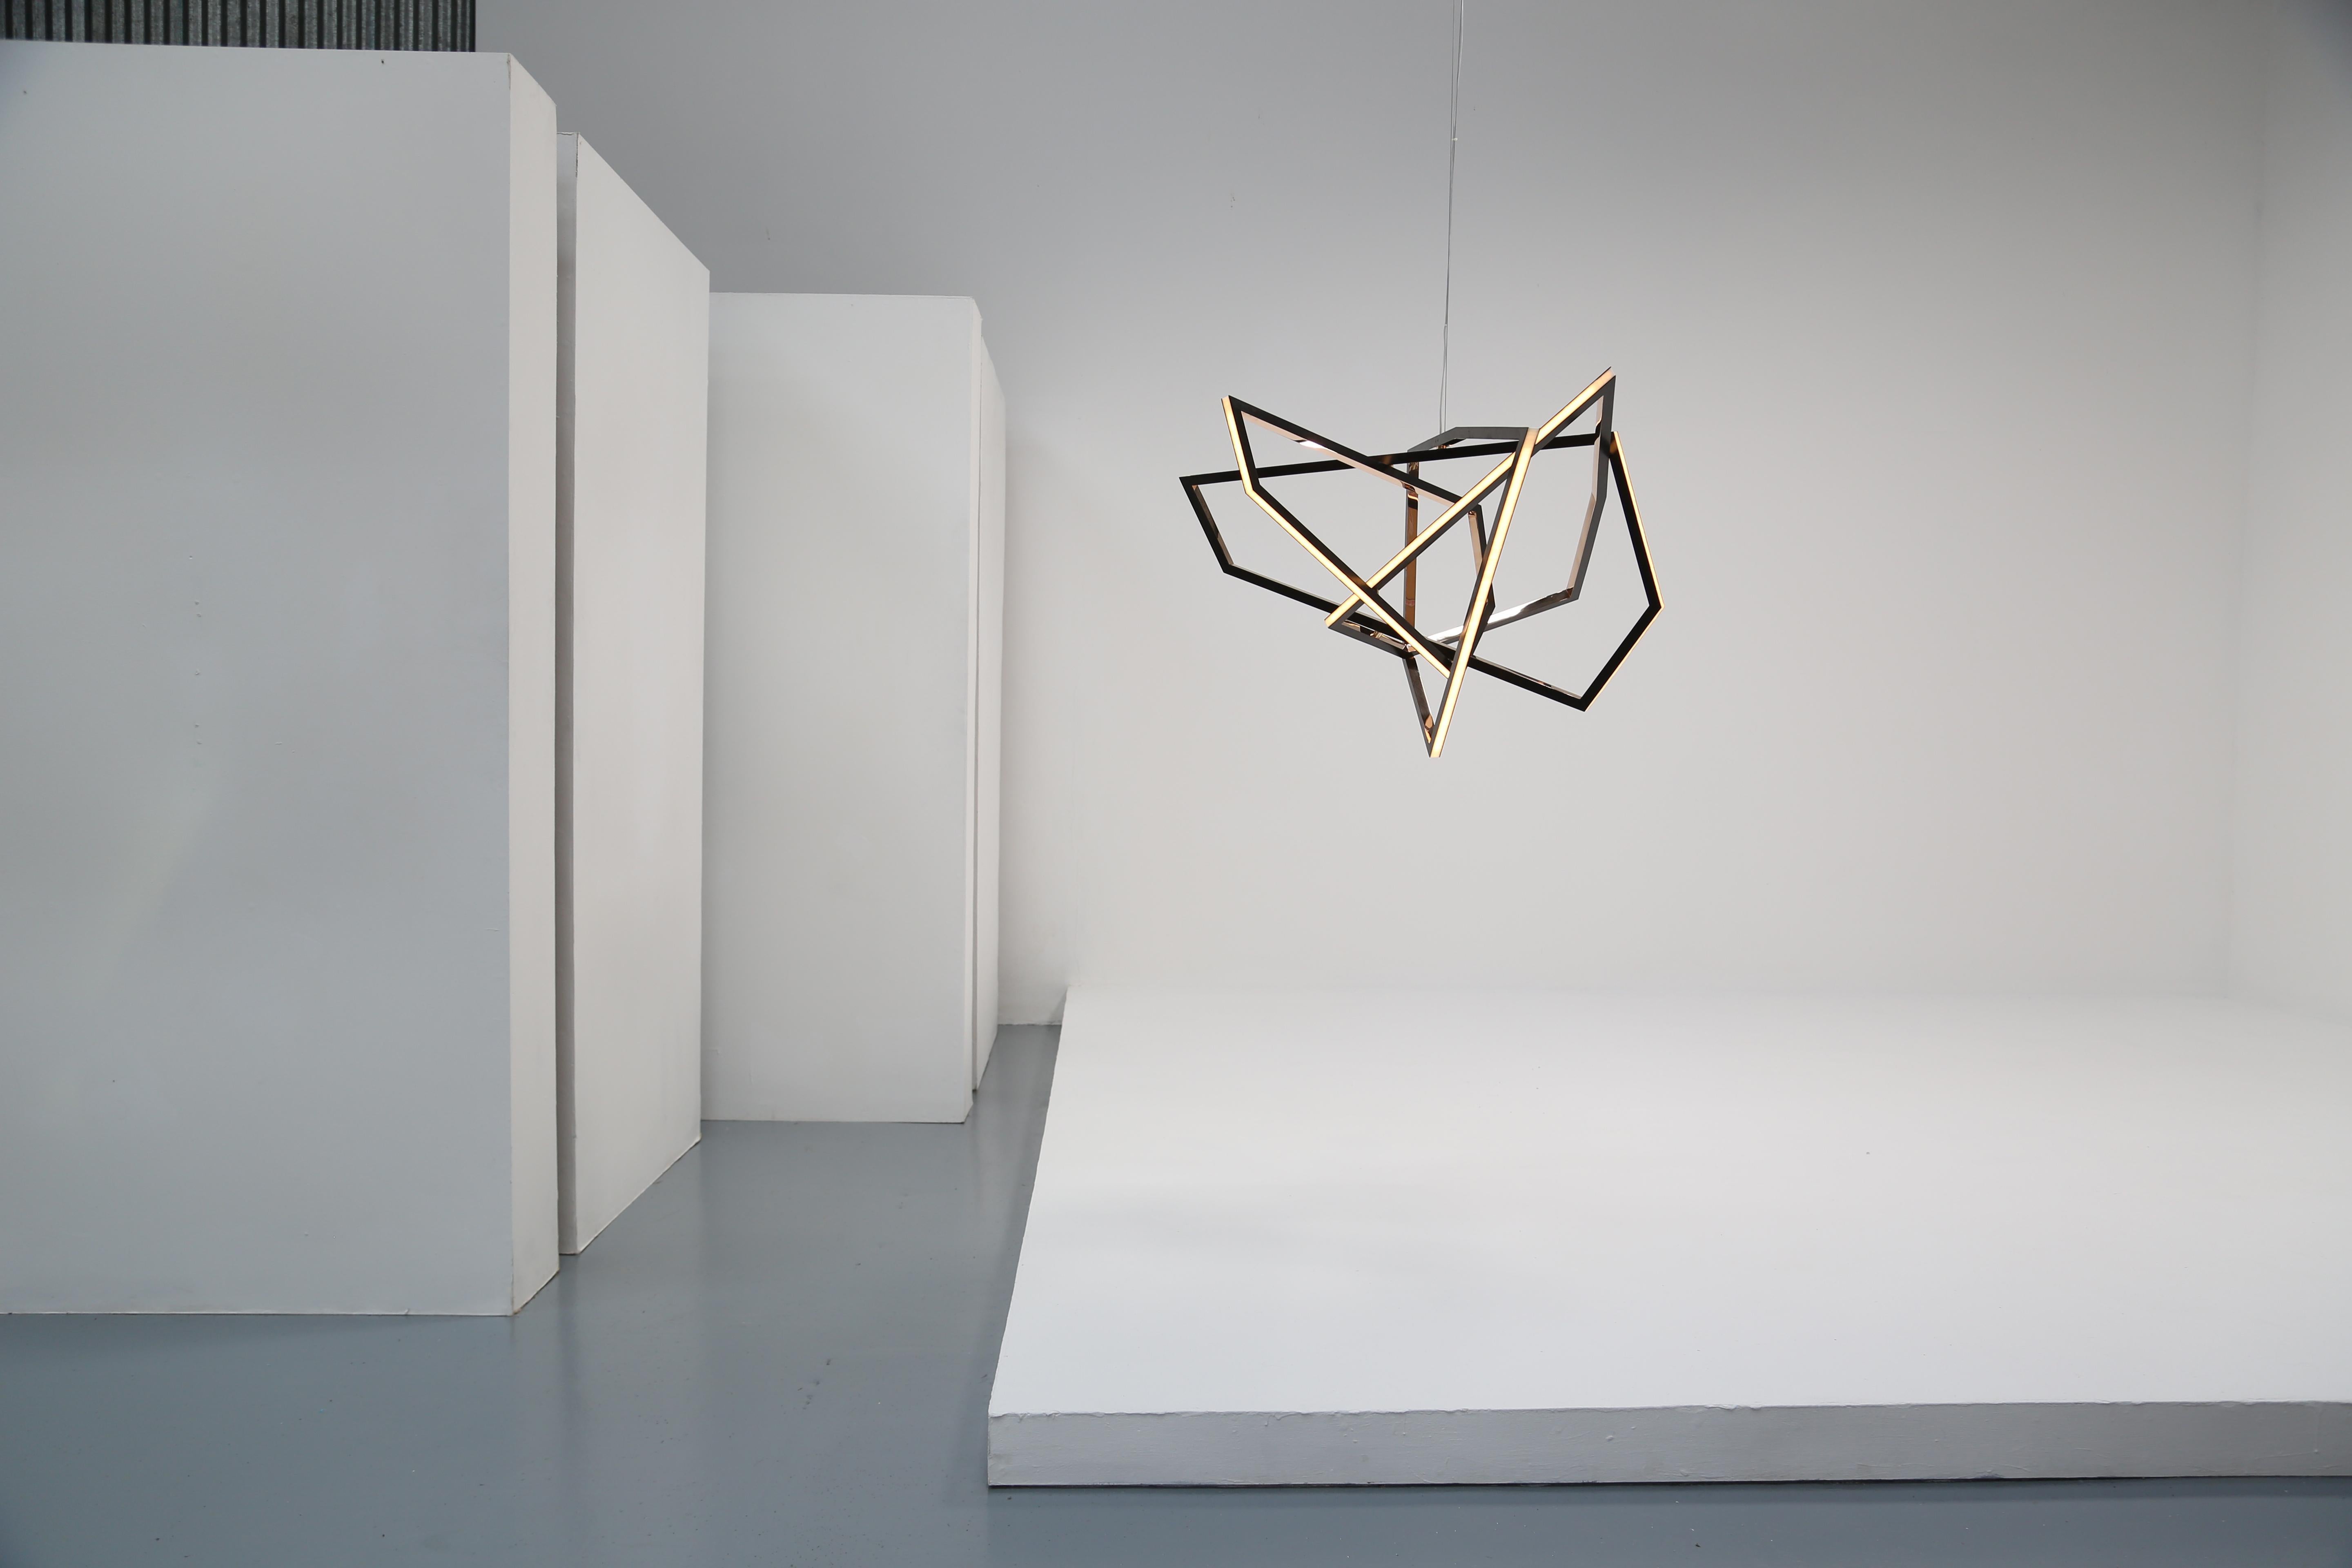 In many of her most powerful sculptures Niamh Barry abandons her signature fluid ellipses for compositions of sharp angles arranged in dynamic, crisscrossing lines forms that suggest a whole different category of motion. With this evocative hanging